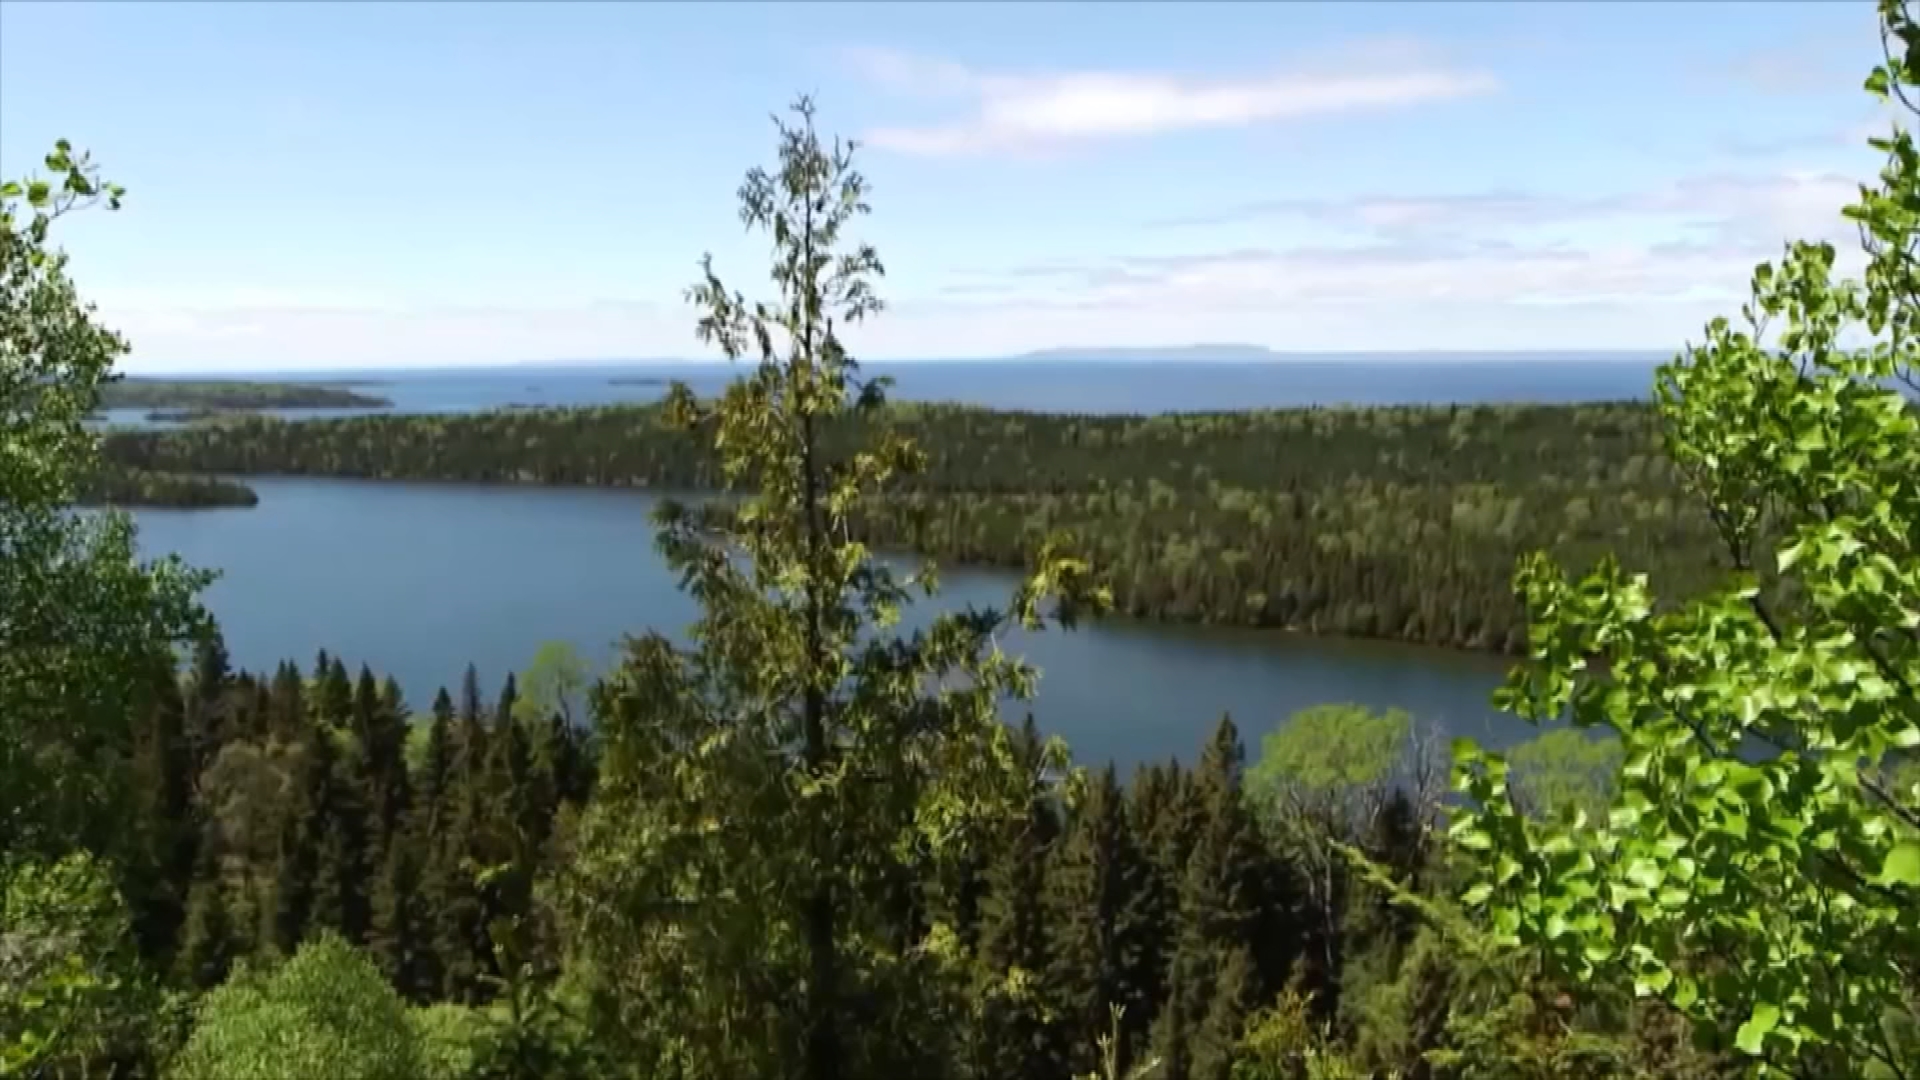 3 Michigan men face federal charges for fire at Isle Royale National Park